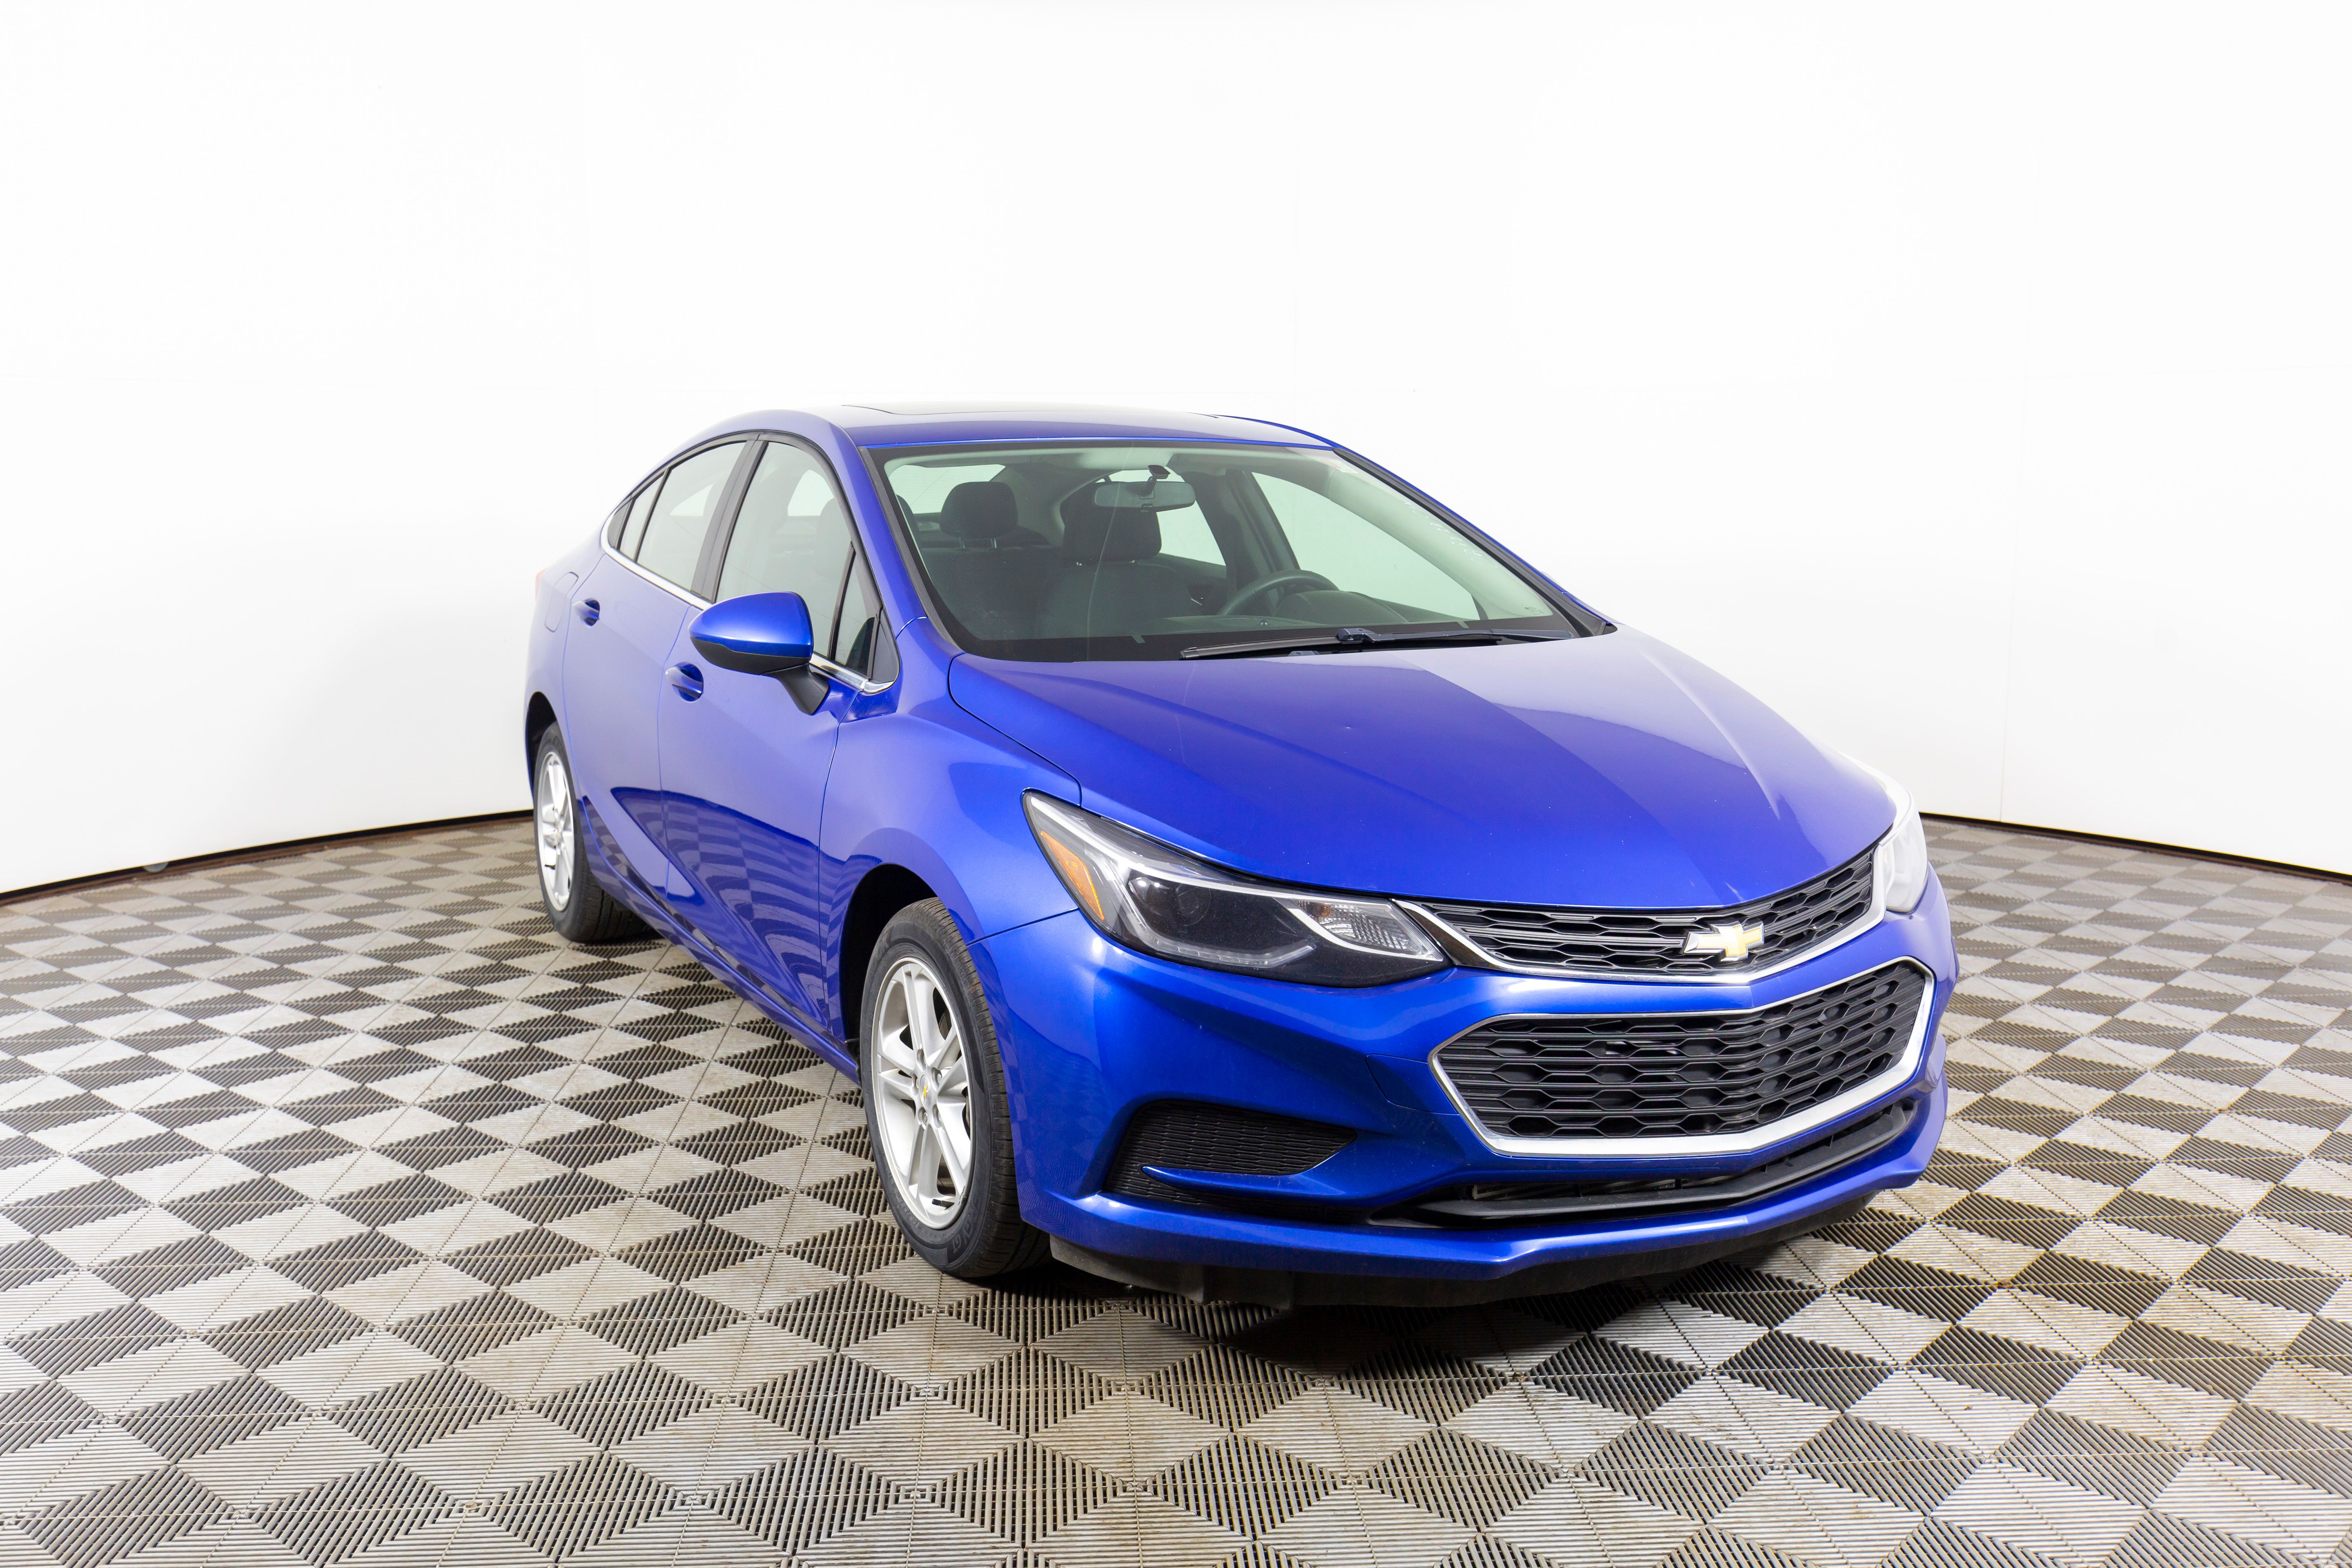 Used 2016 CHEVROLET Cruze LT Front Wheel Drive 4dr Car